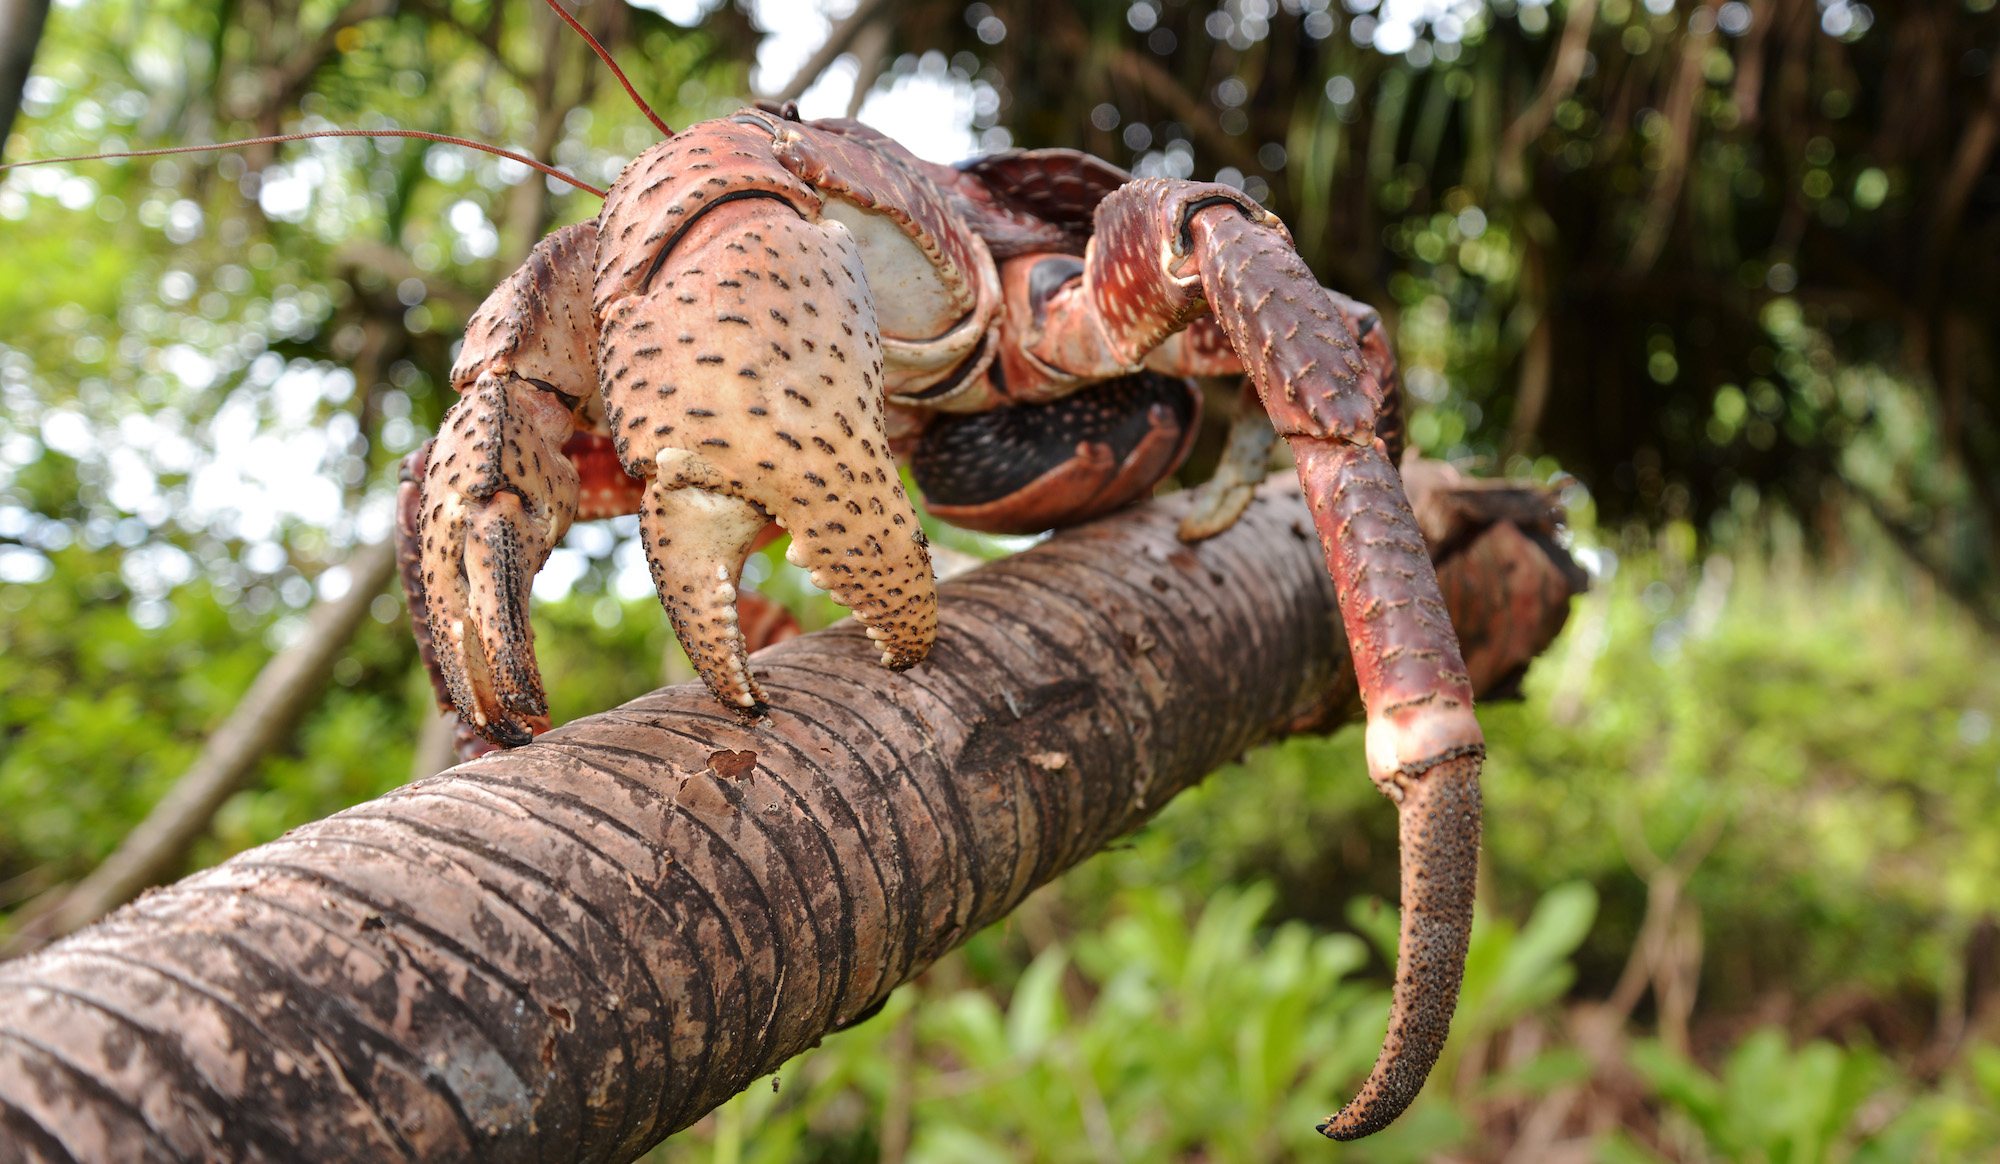 Meet the World's Largest Land Crab